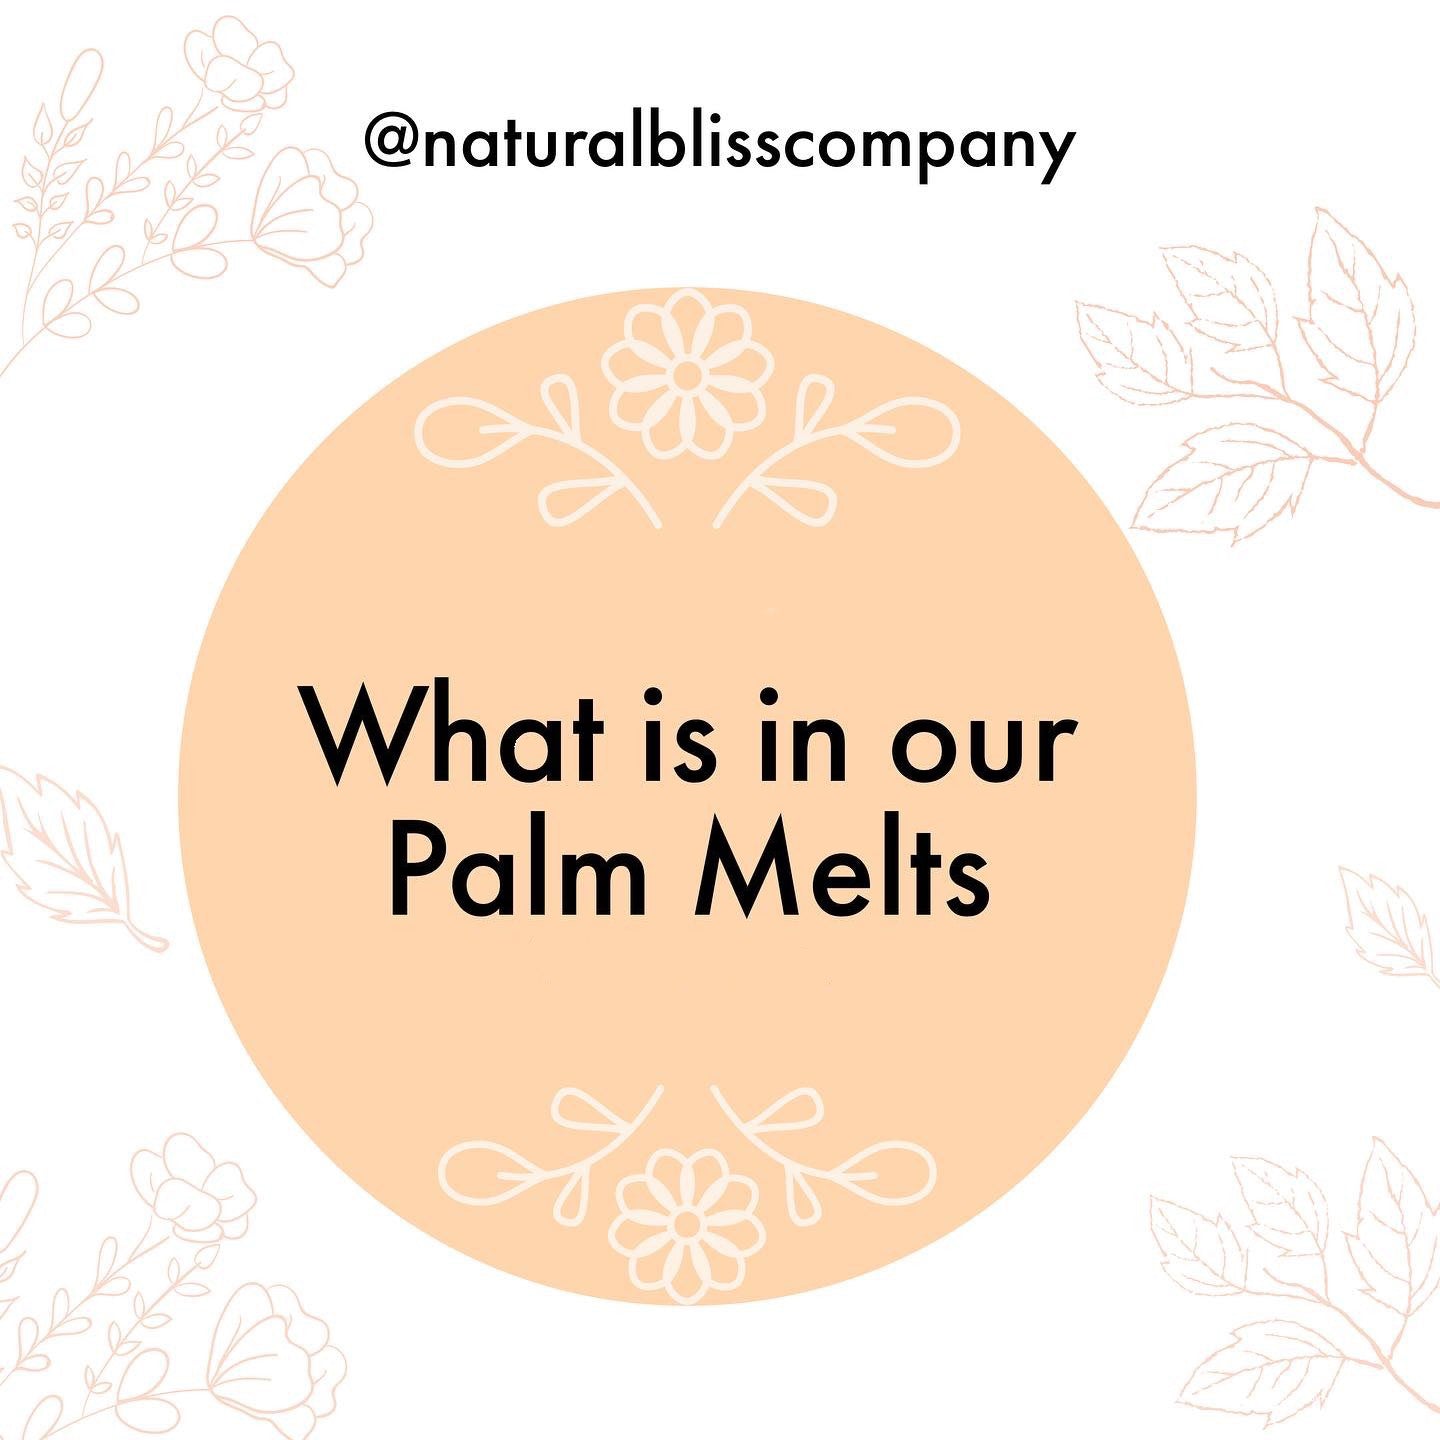 What’s in our Palm Melts?